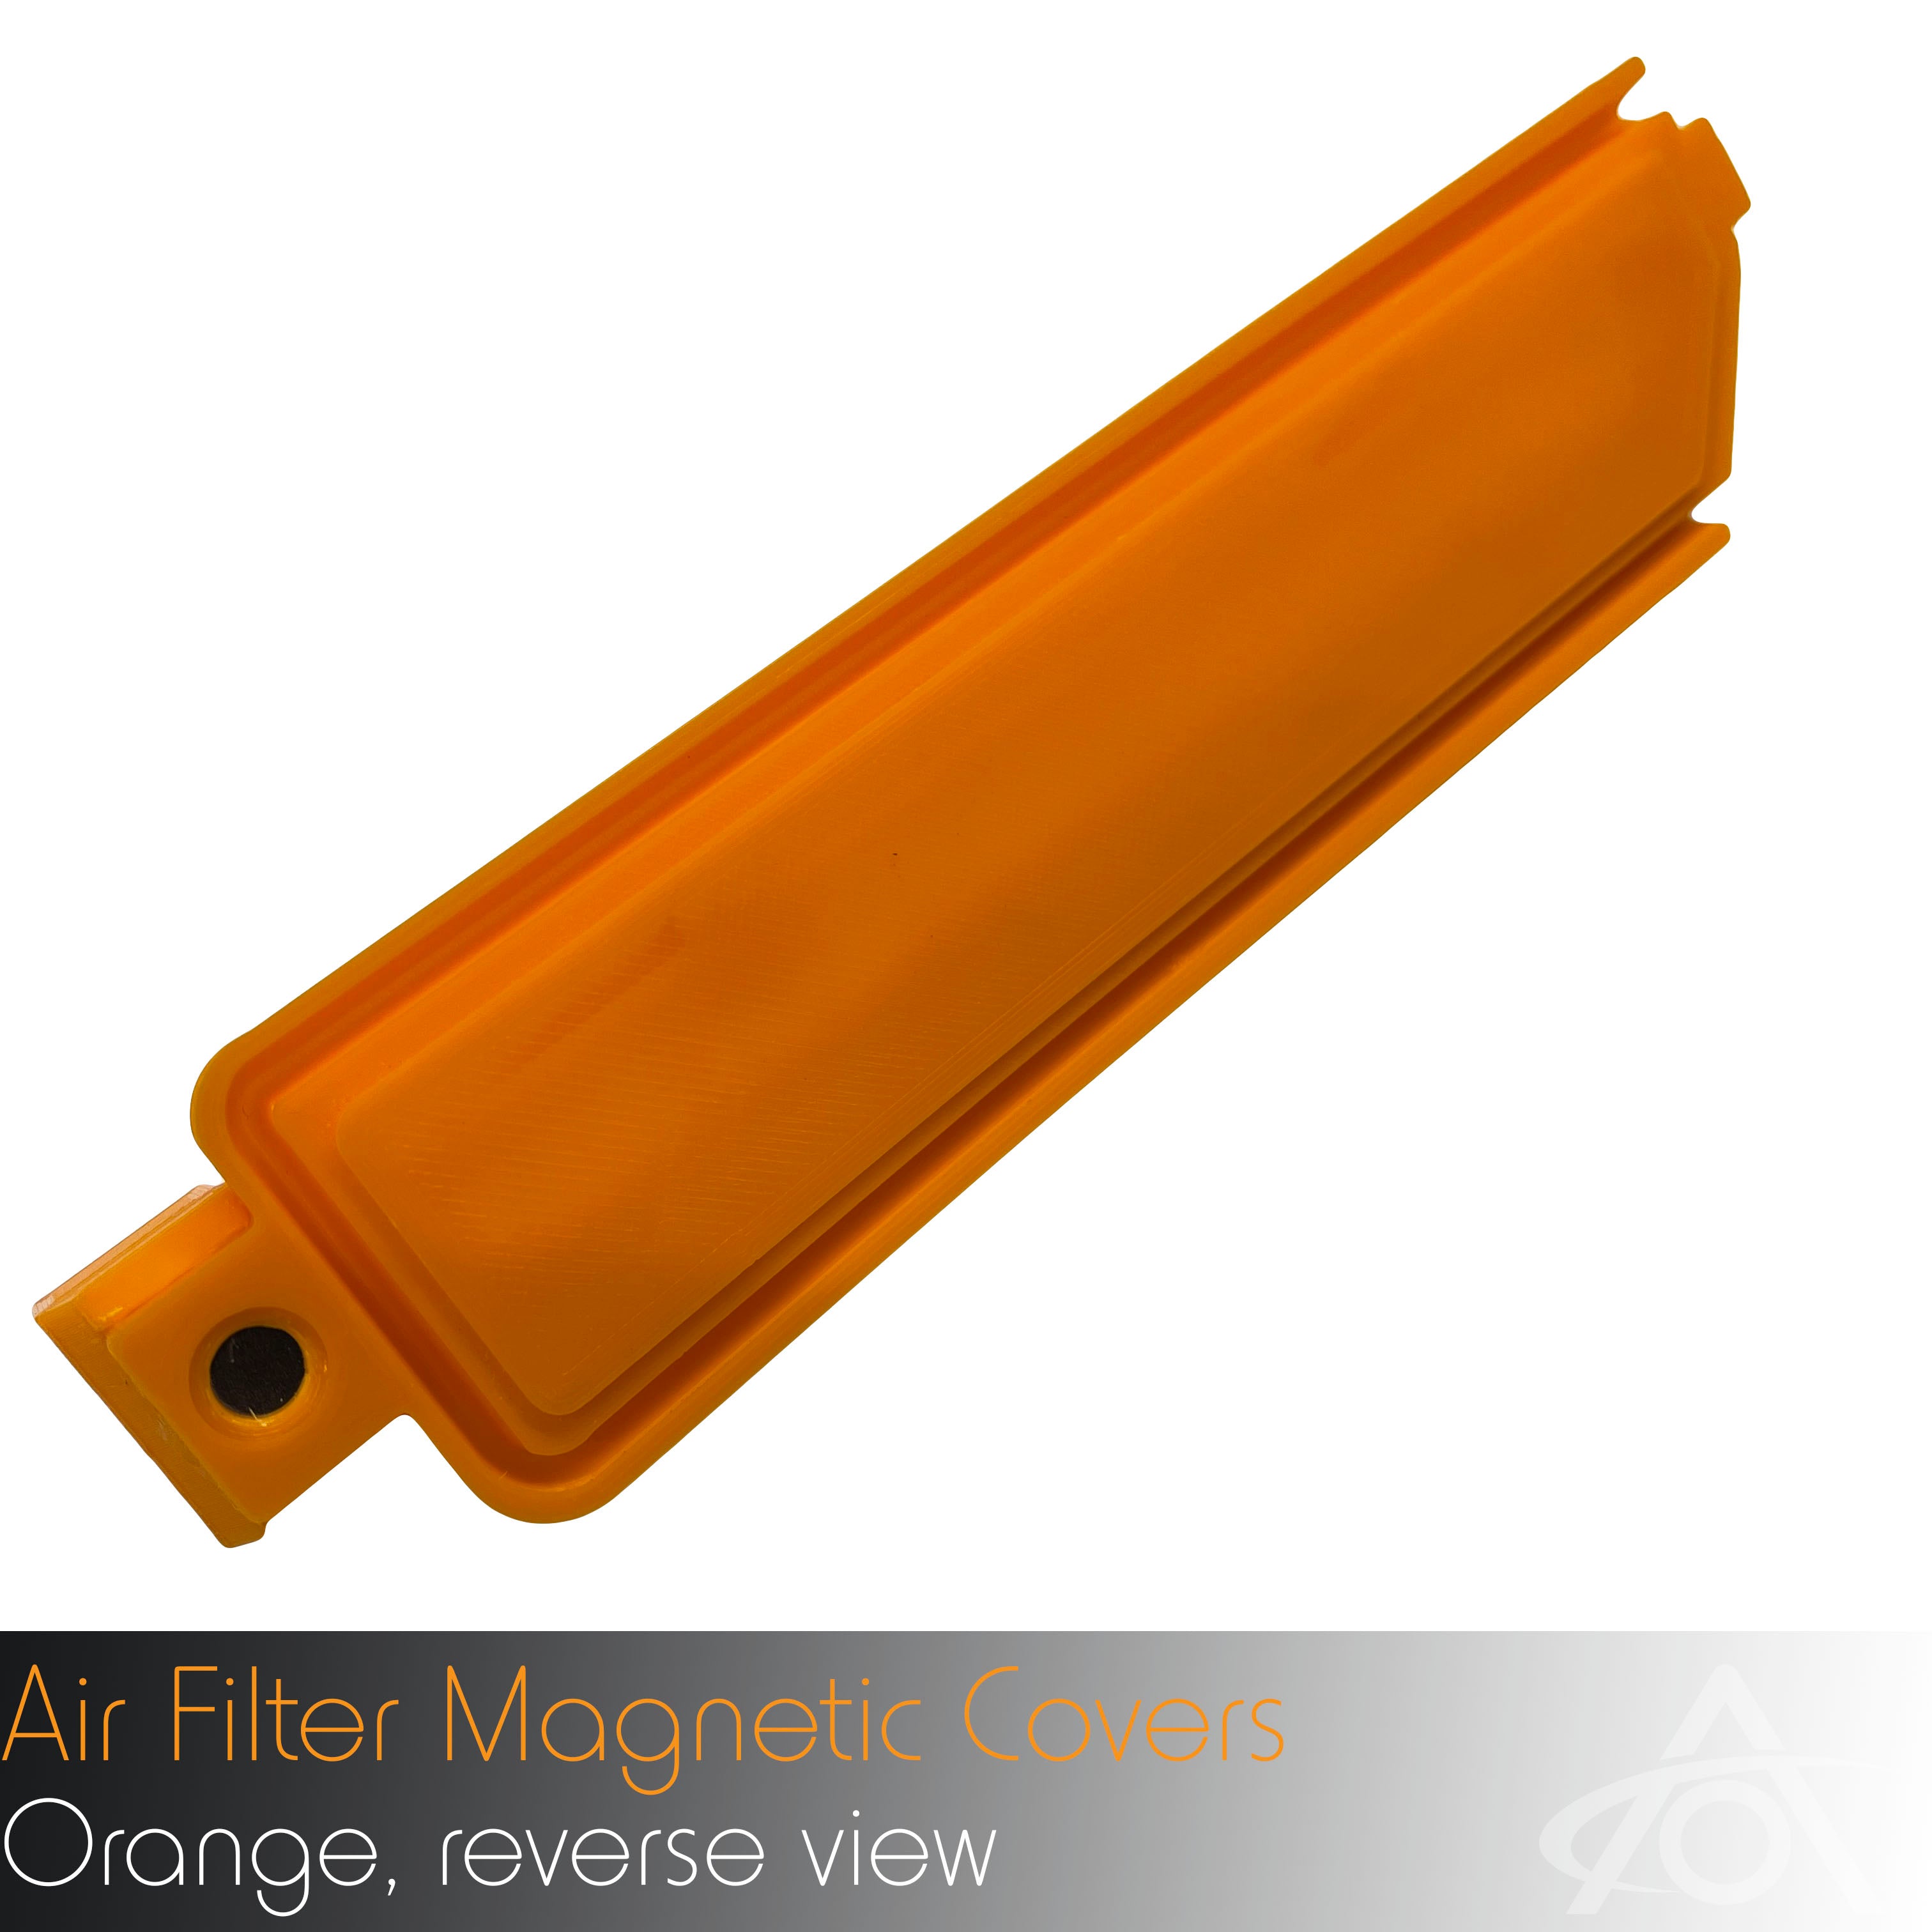 Air Filter Magnetic Cover